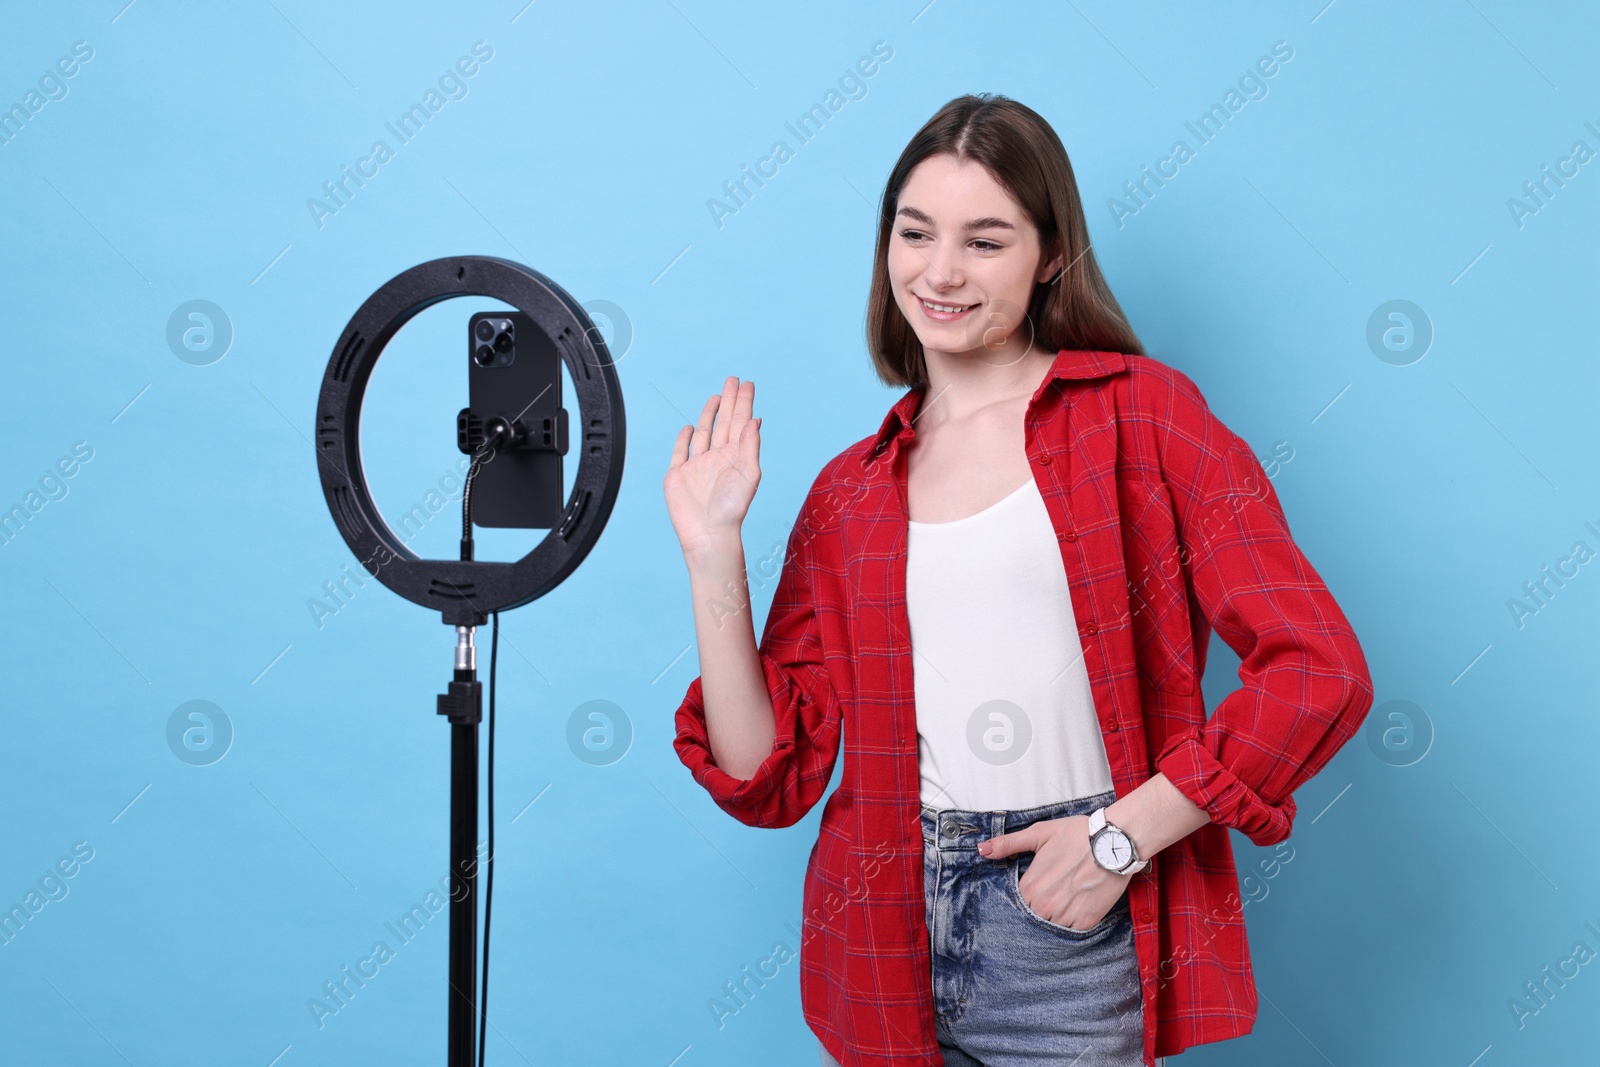 Photo of Blogger recording video with smartphone and ring lamp on light blue background